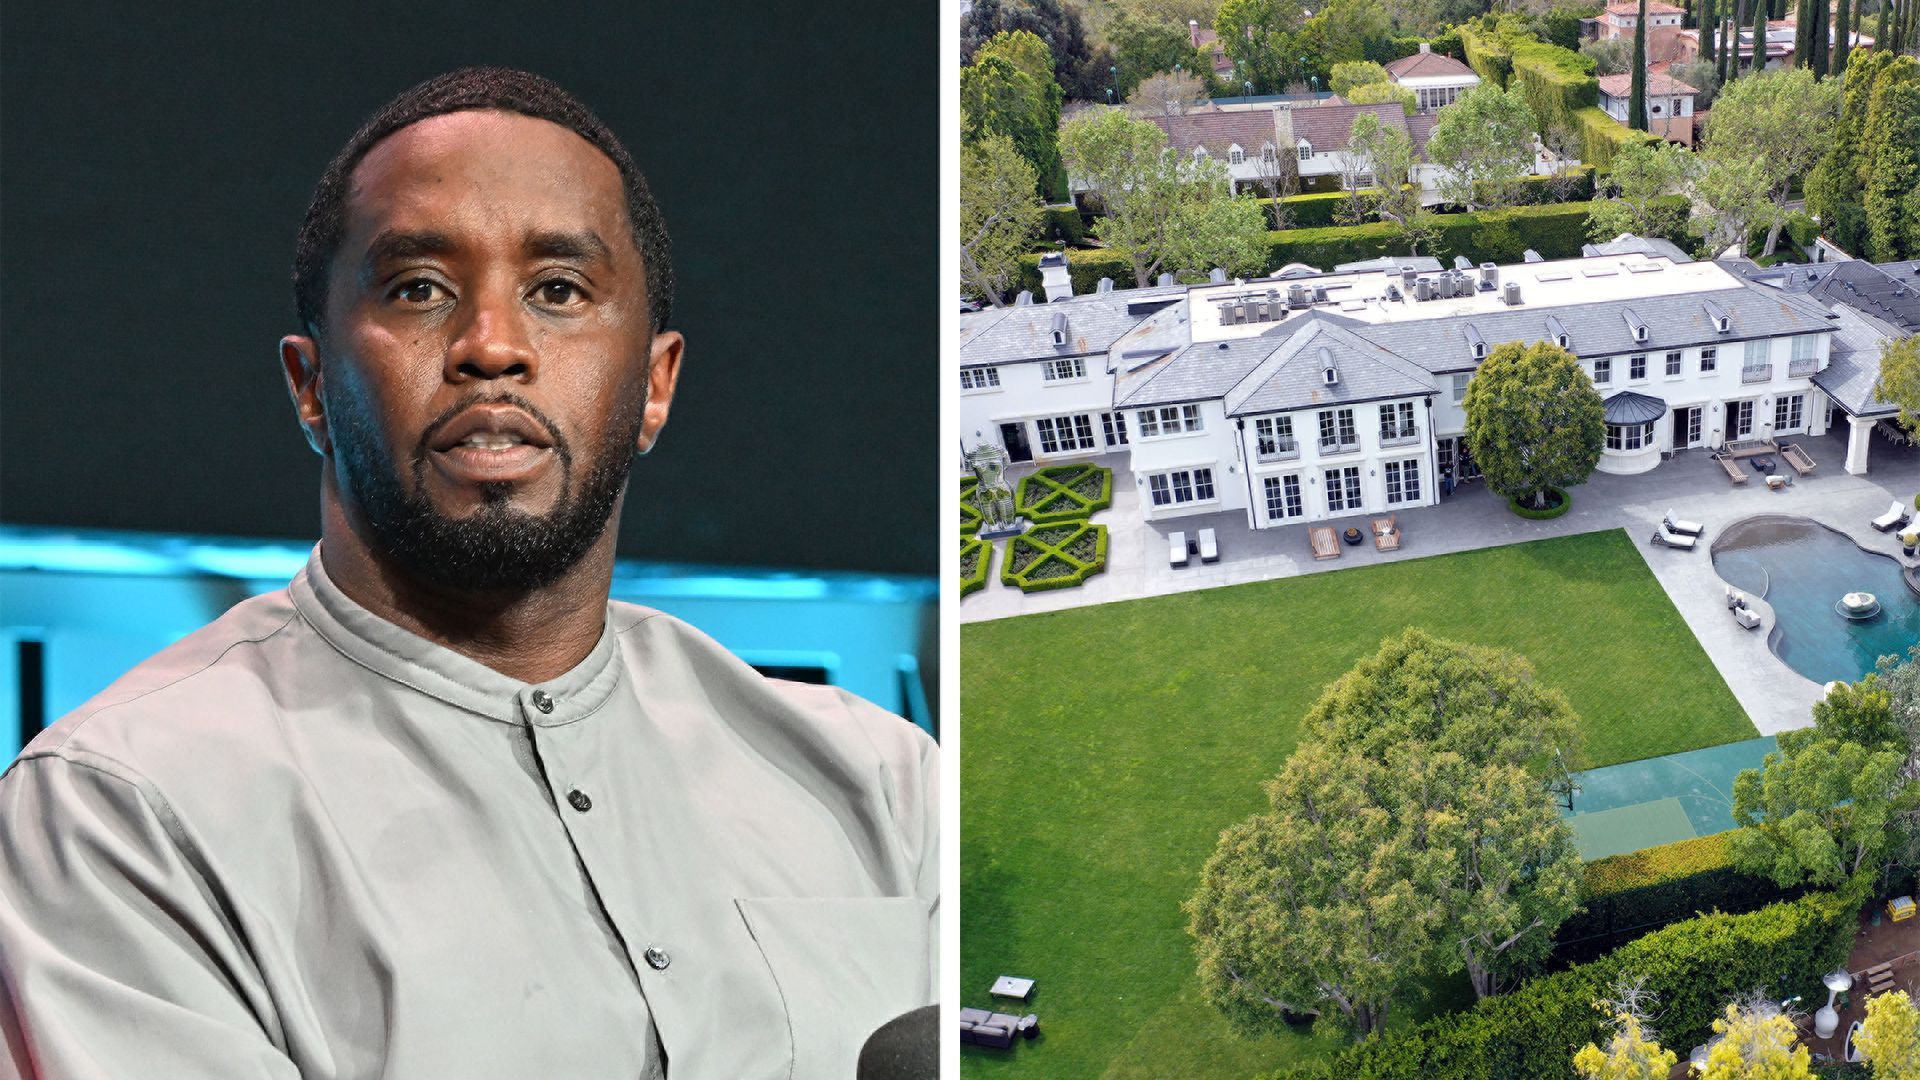 A photo of Sean 'Diddy' Combs and a photo of his LA Mansion